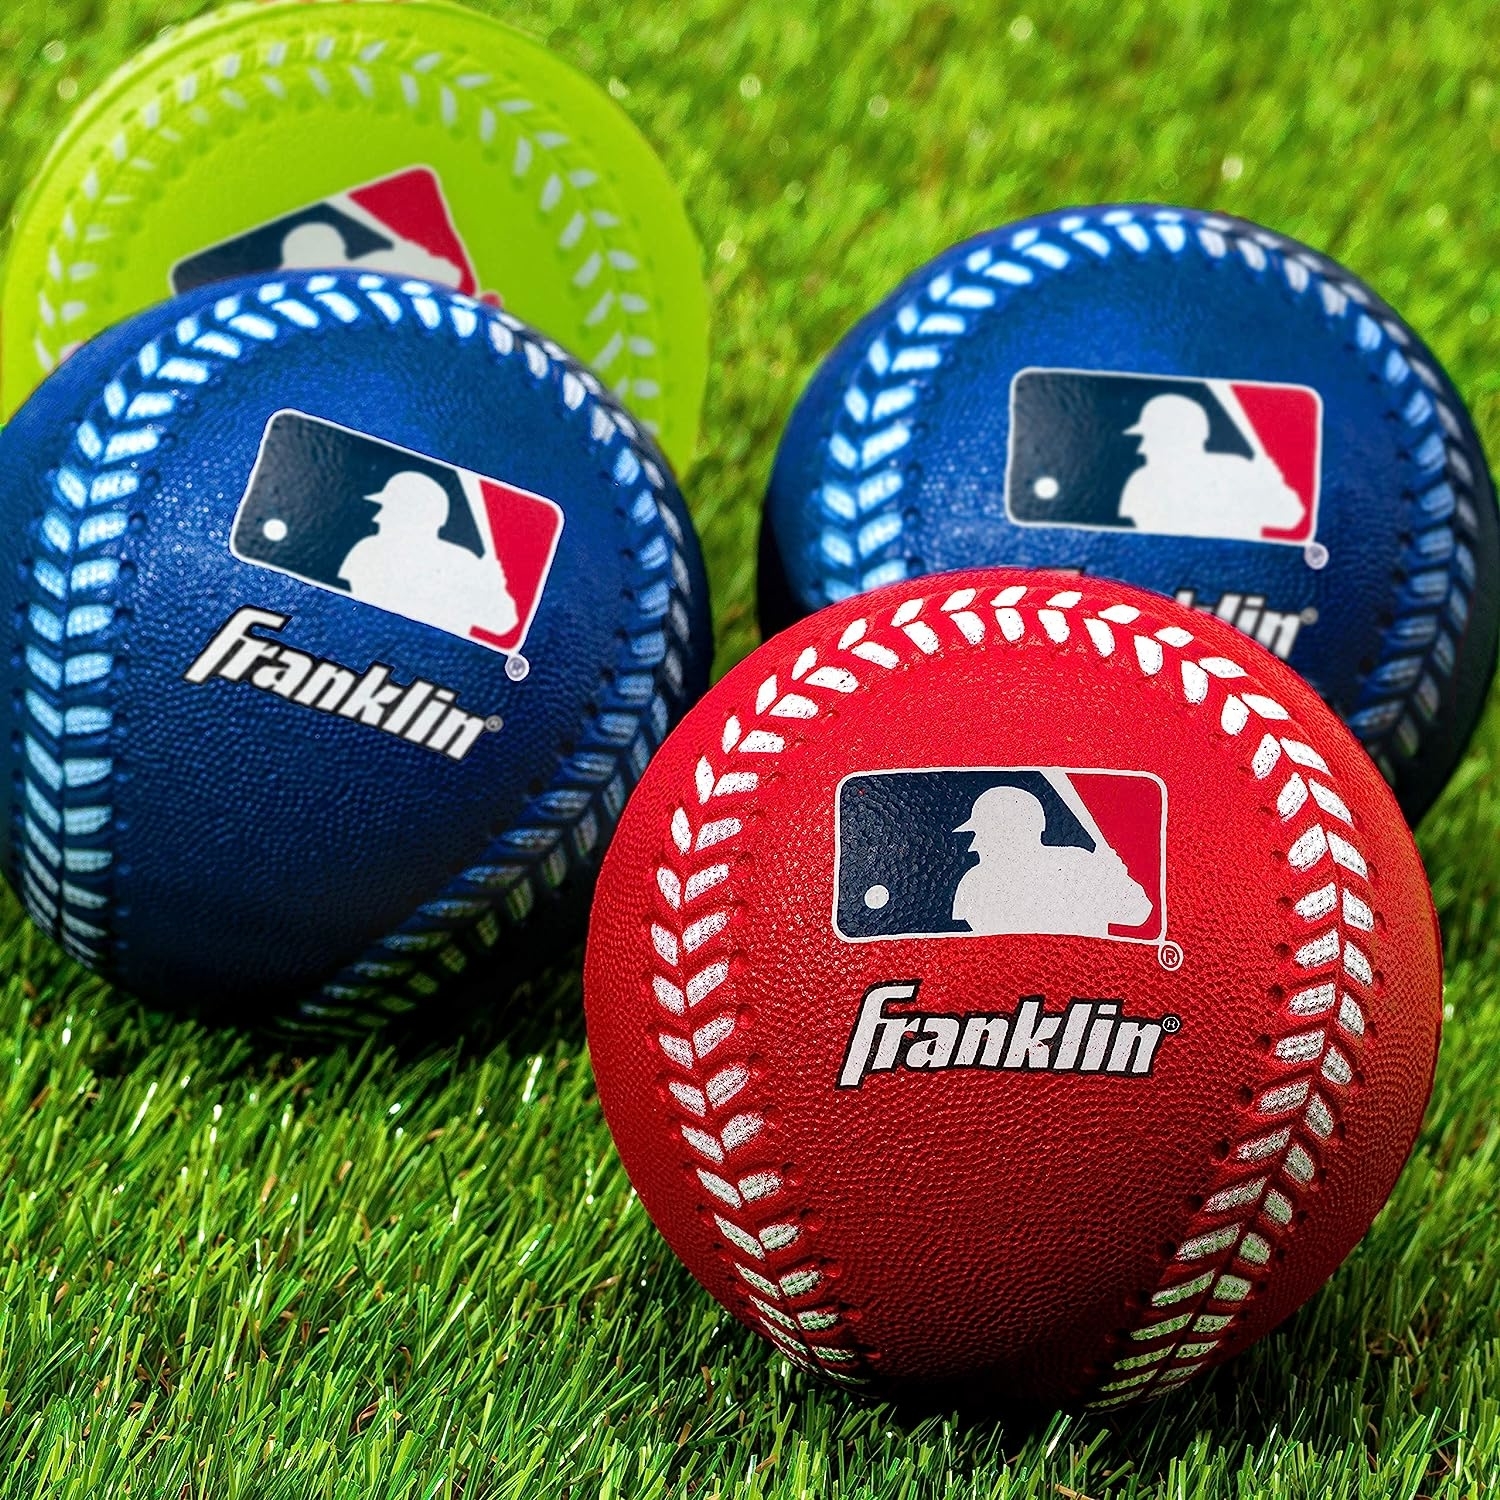 A red, a green, and two blue foam baseballs